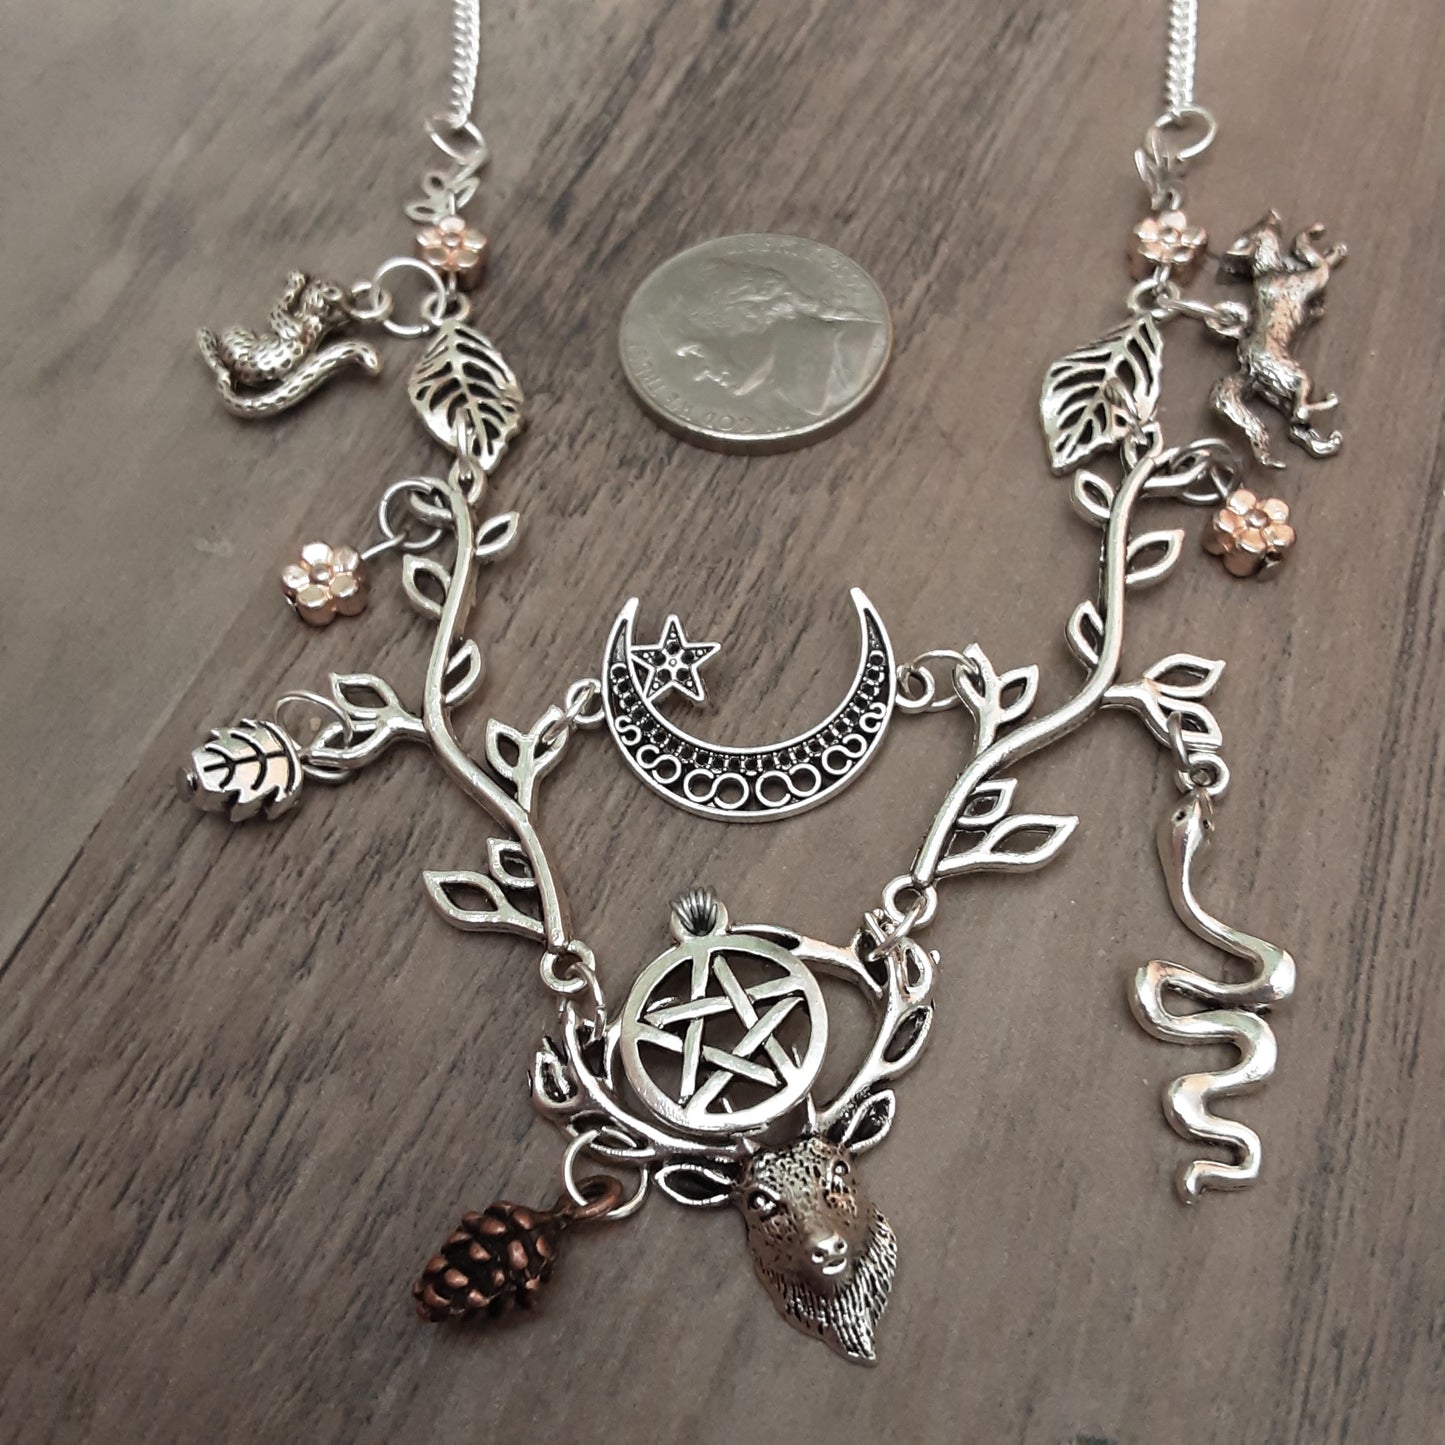 Cernunnos Necklace Lord of Wild Things Pagan Jewelry